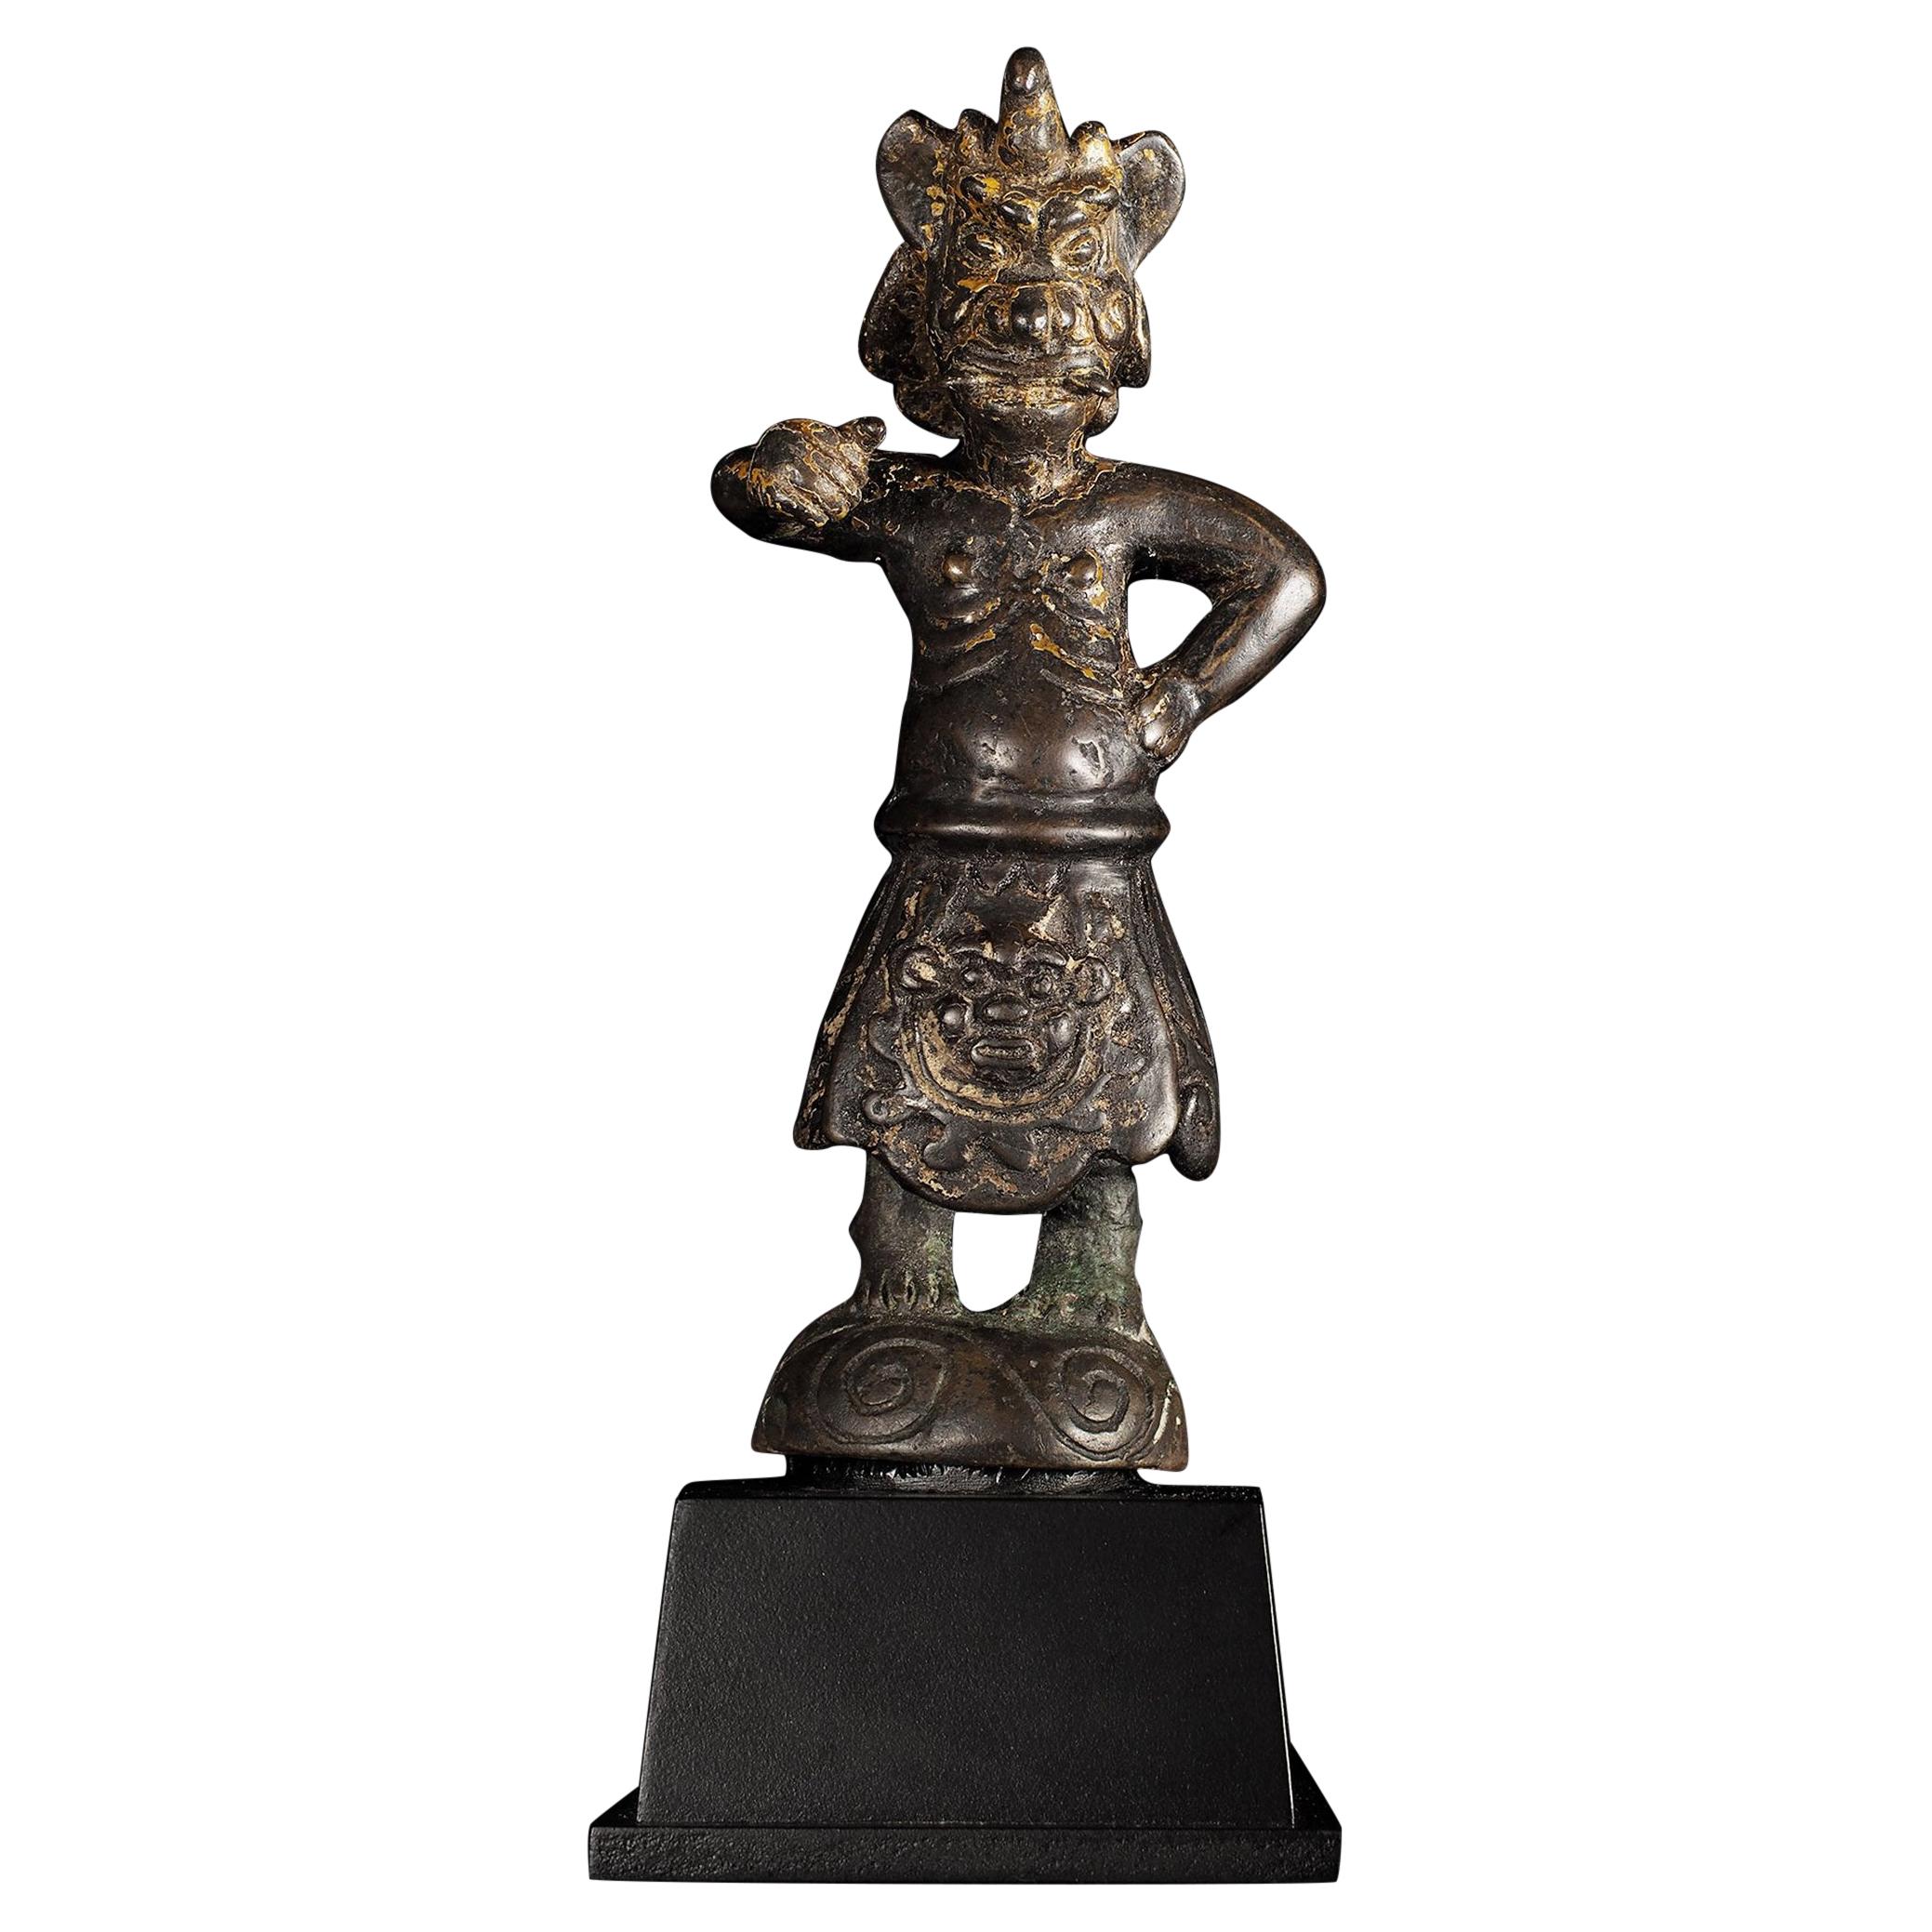 15thC or Earlier Chinese Guardian Figure - 9459